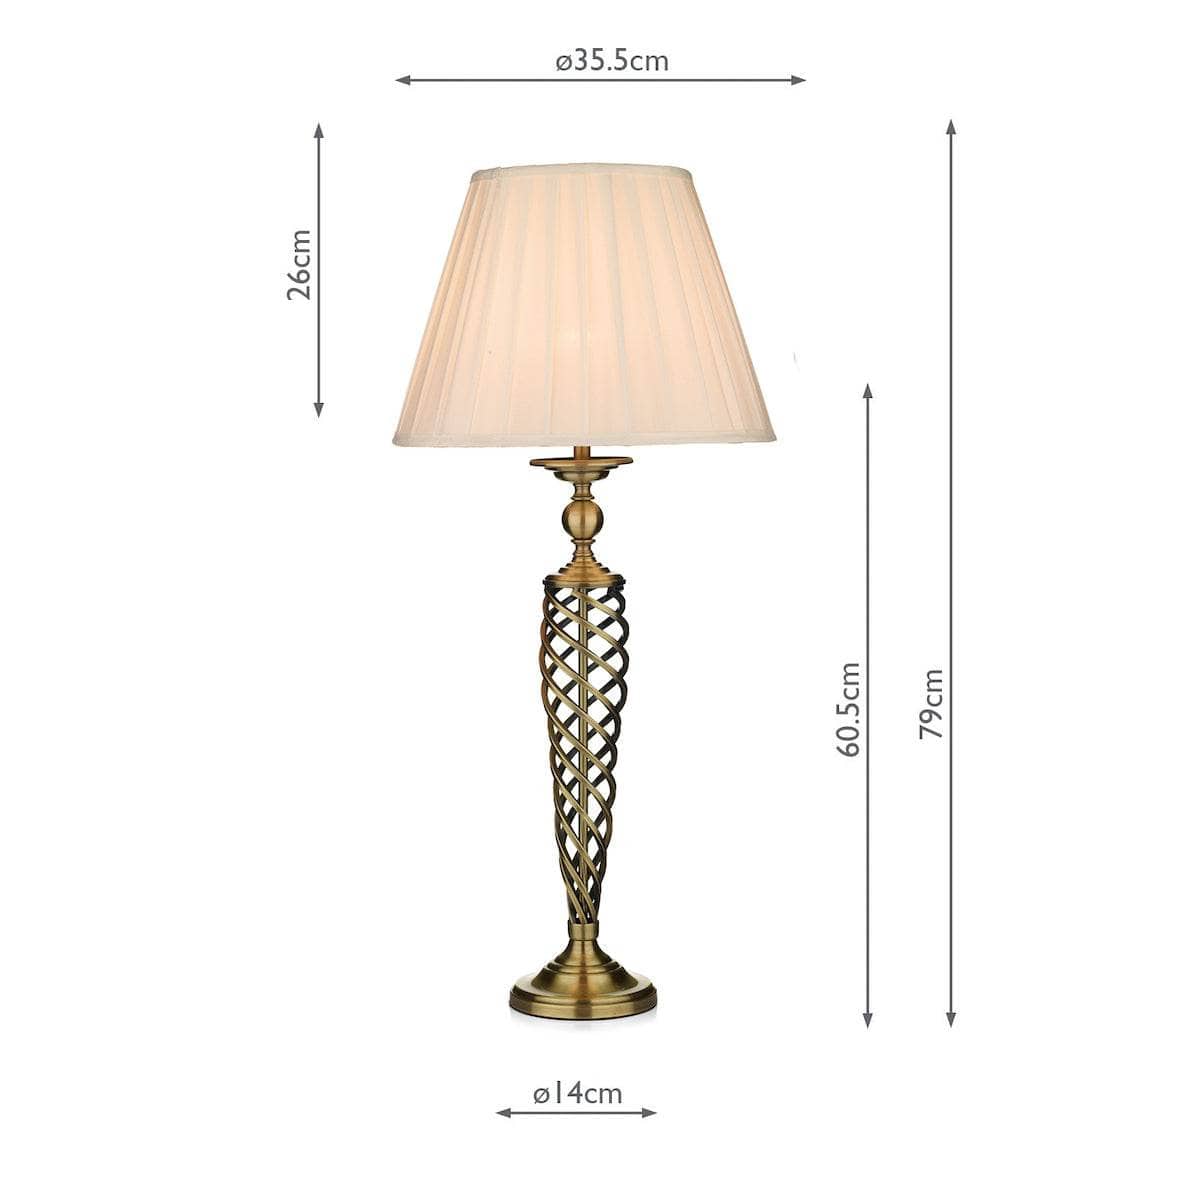 Lights  -  Zaragoza Table Lamp Complete With Shade Antique Brass  -  50085214